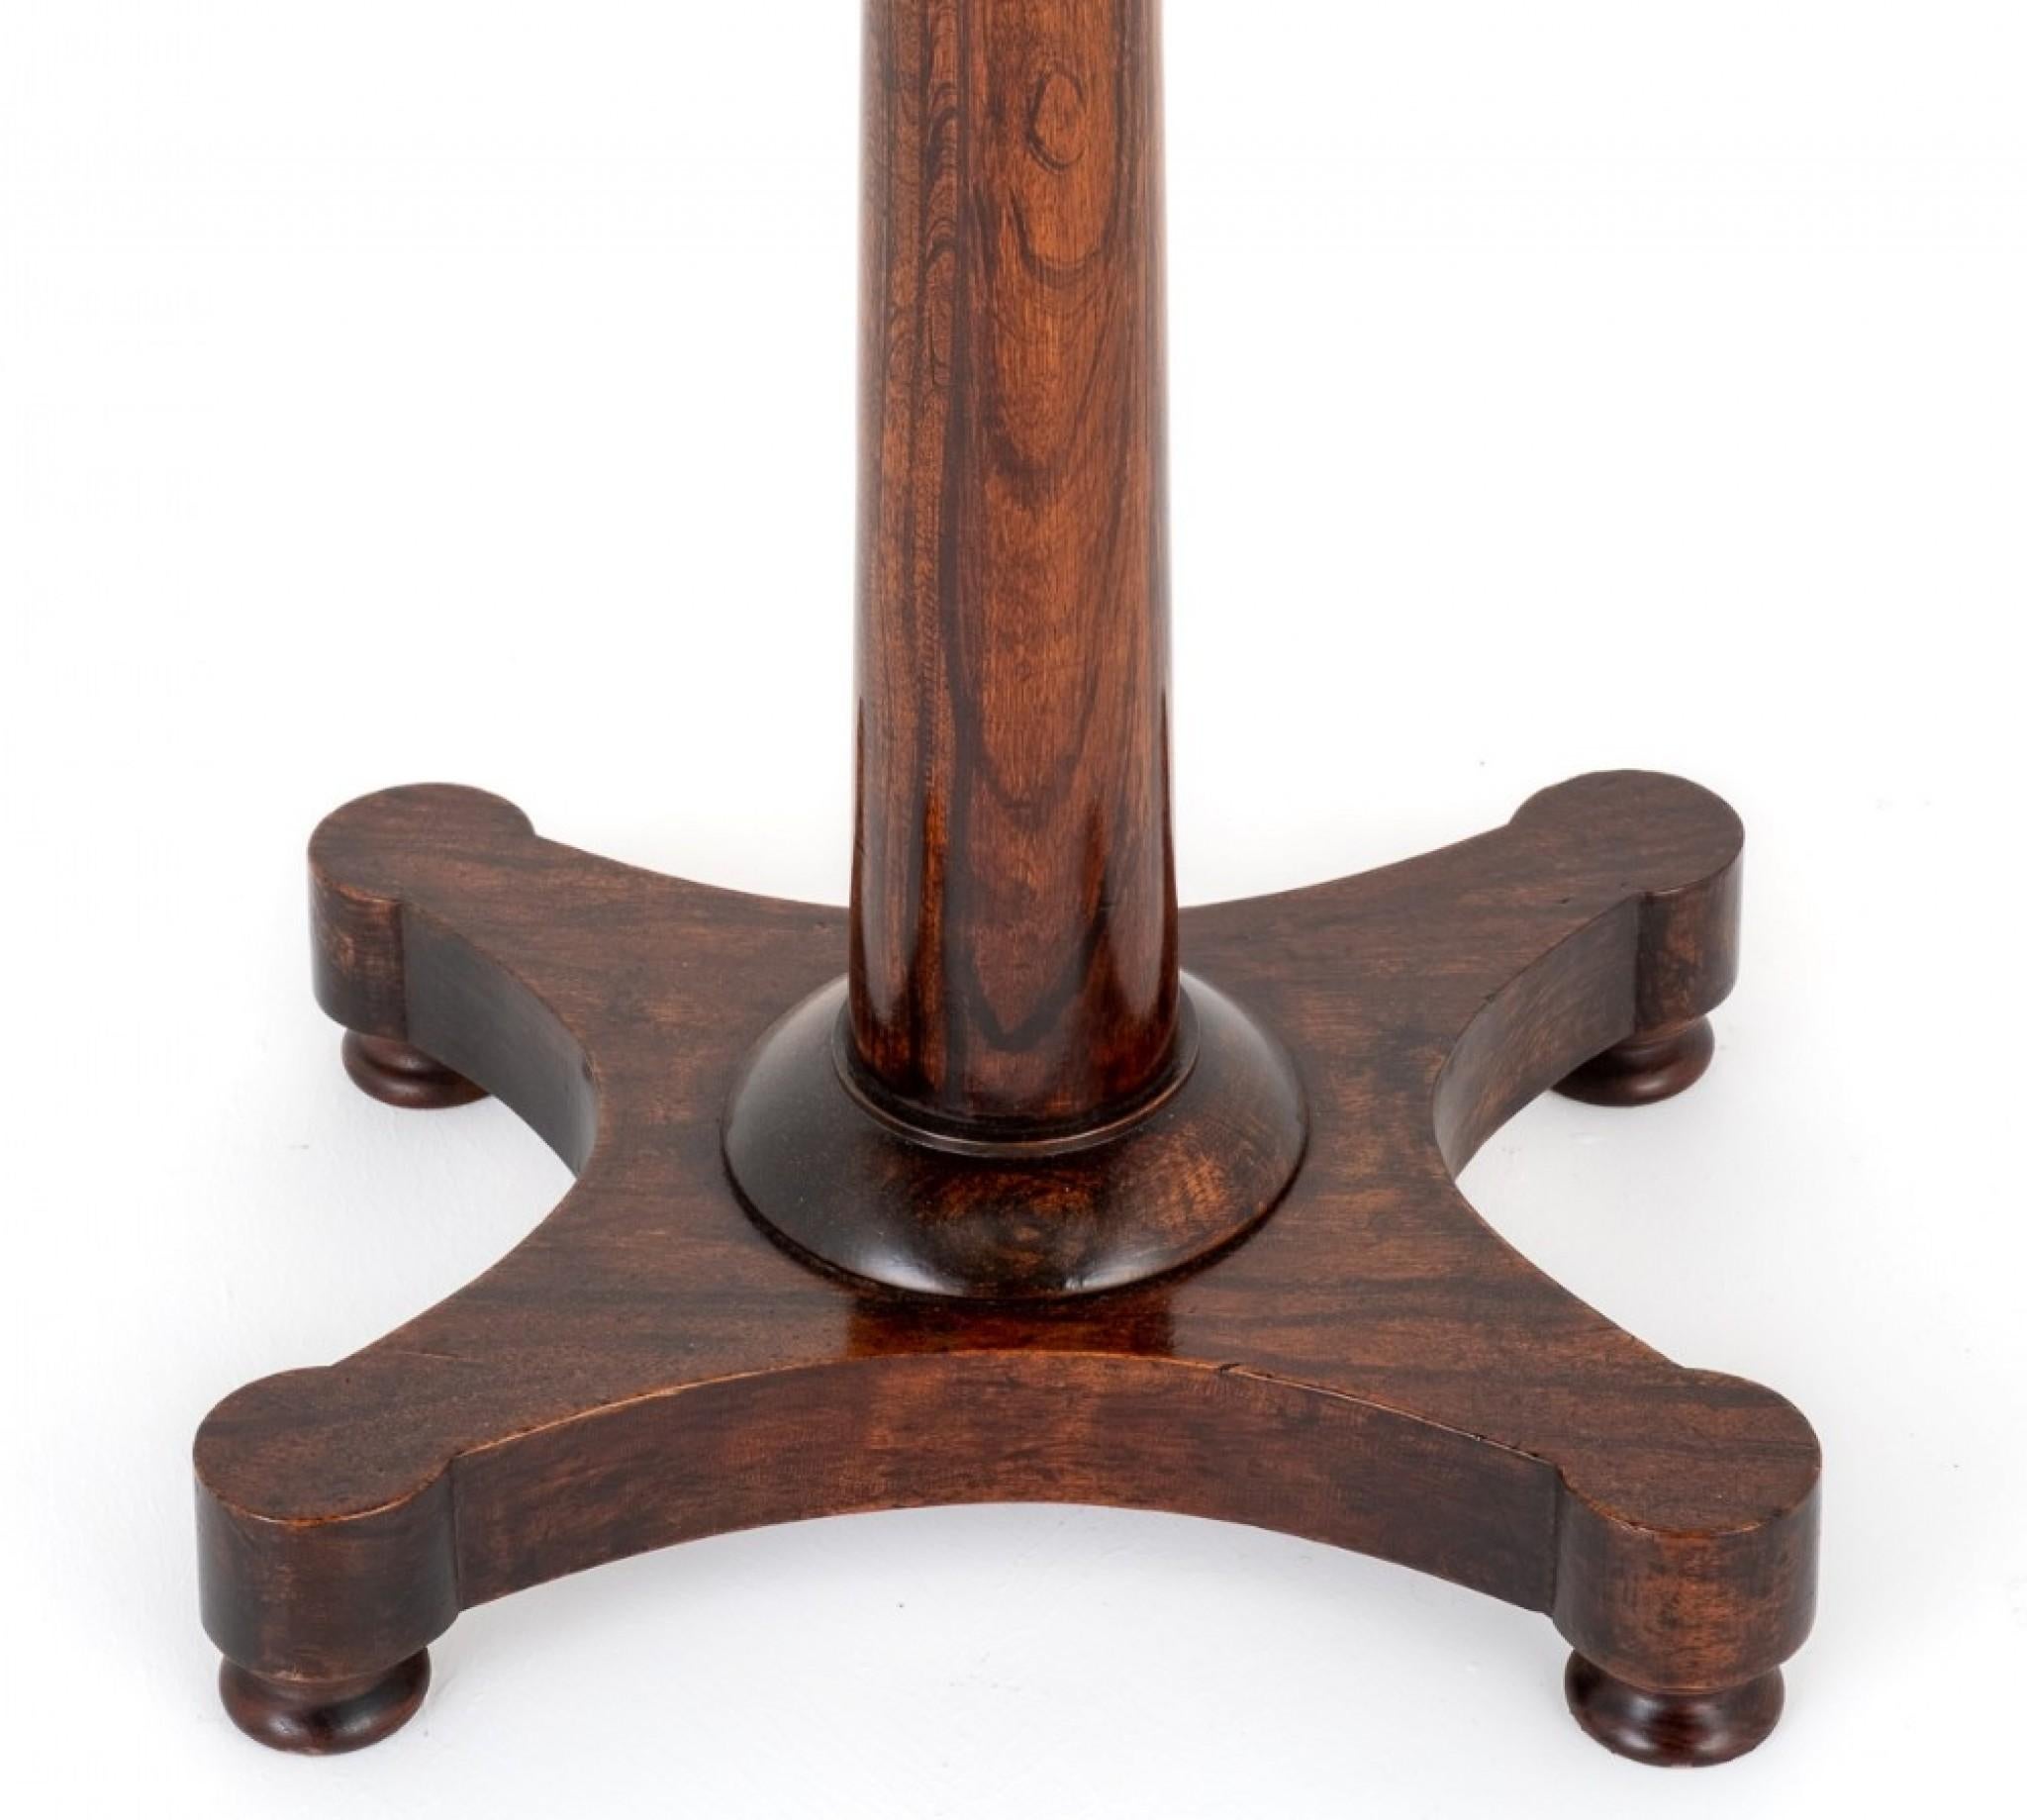 William IV Rosewood Occasional table.
19th century
The Table Stands Upon a Platform Base With Turned Bun Feet and a Turned Column.
The Top Being of an Oblong Form.
Presented in good condition.